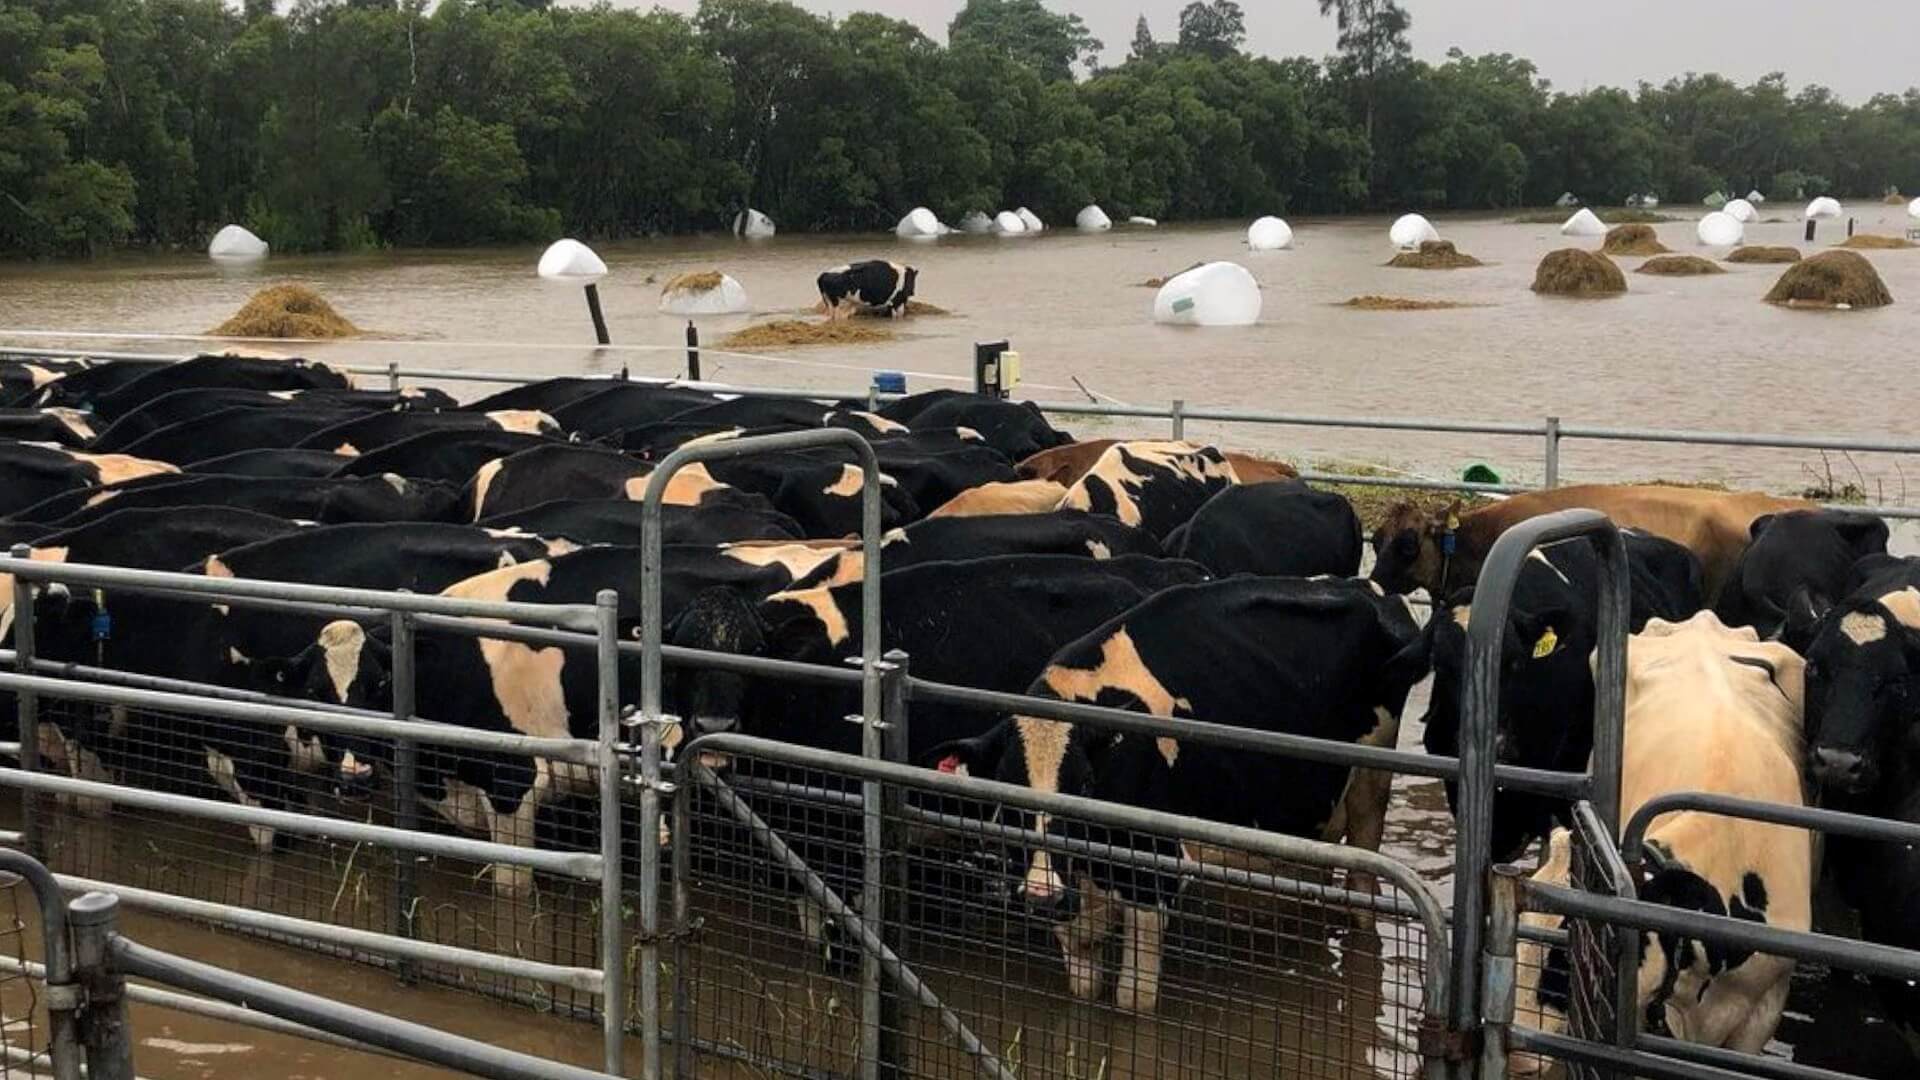 Dairy cows standing in a yard in flood water. In the background there are bales of sillage floating in the water